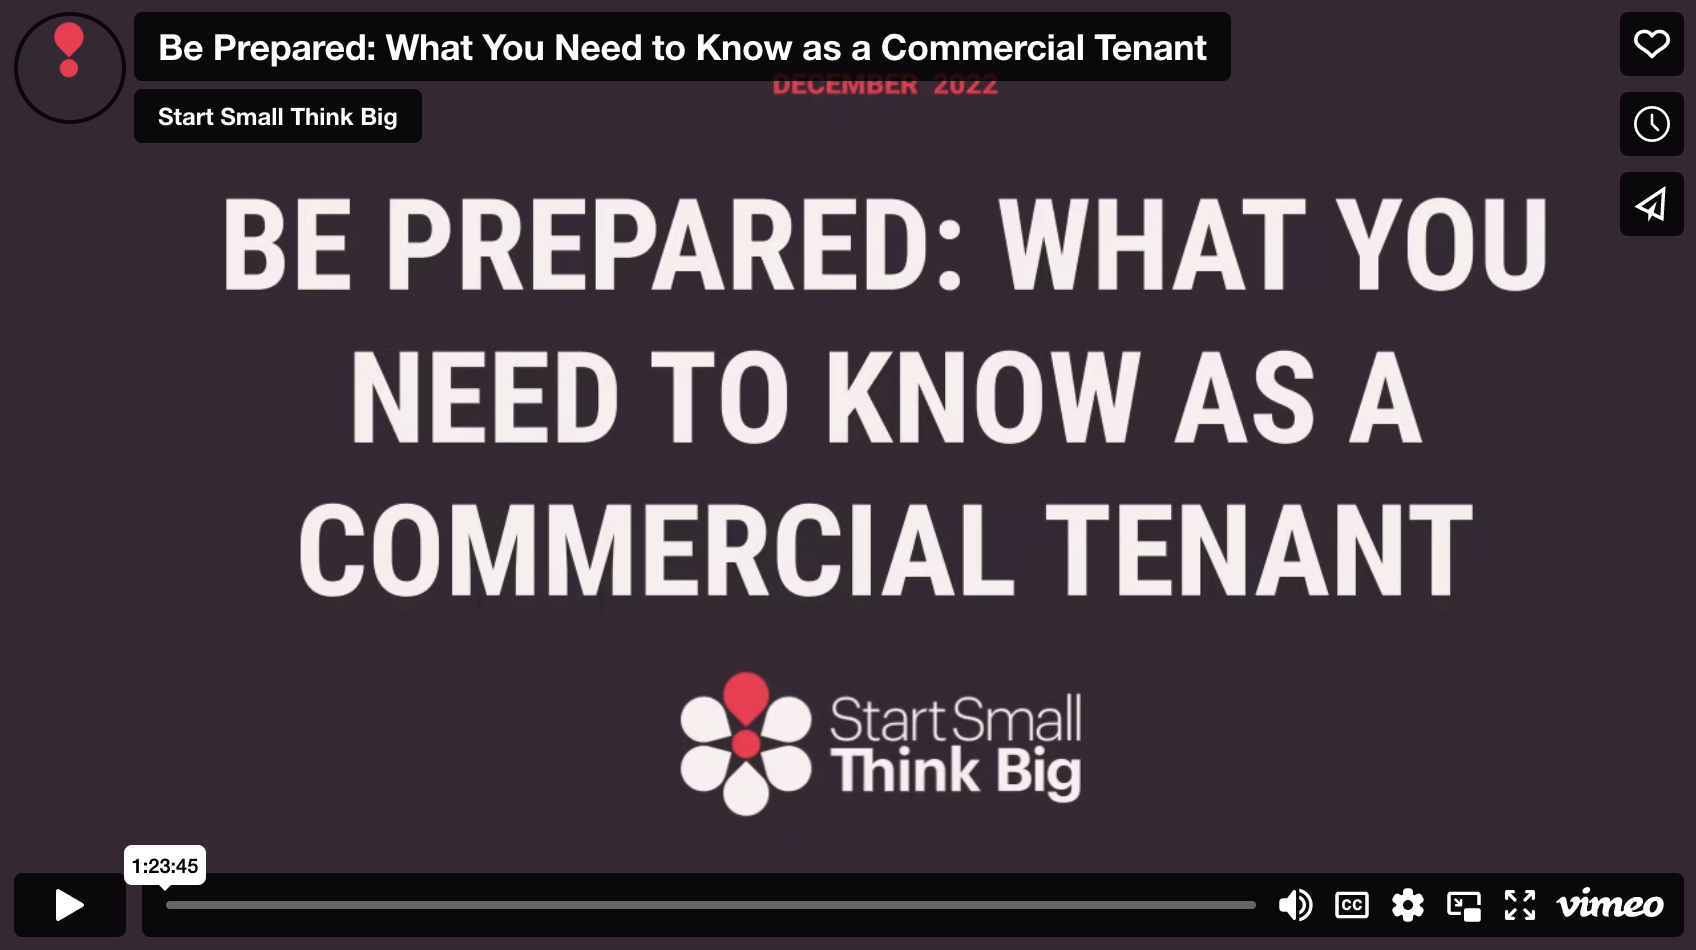 Be Prepared: What You Need to Know as a Commercial Tenant